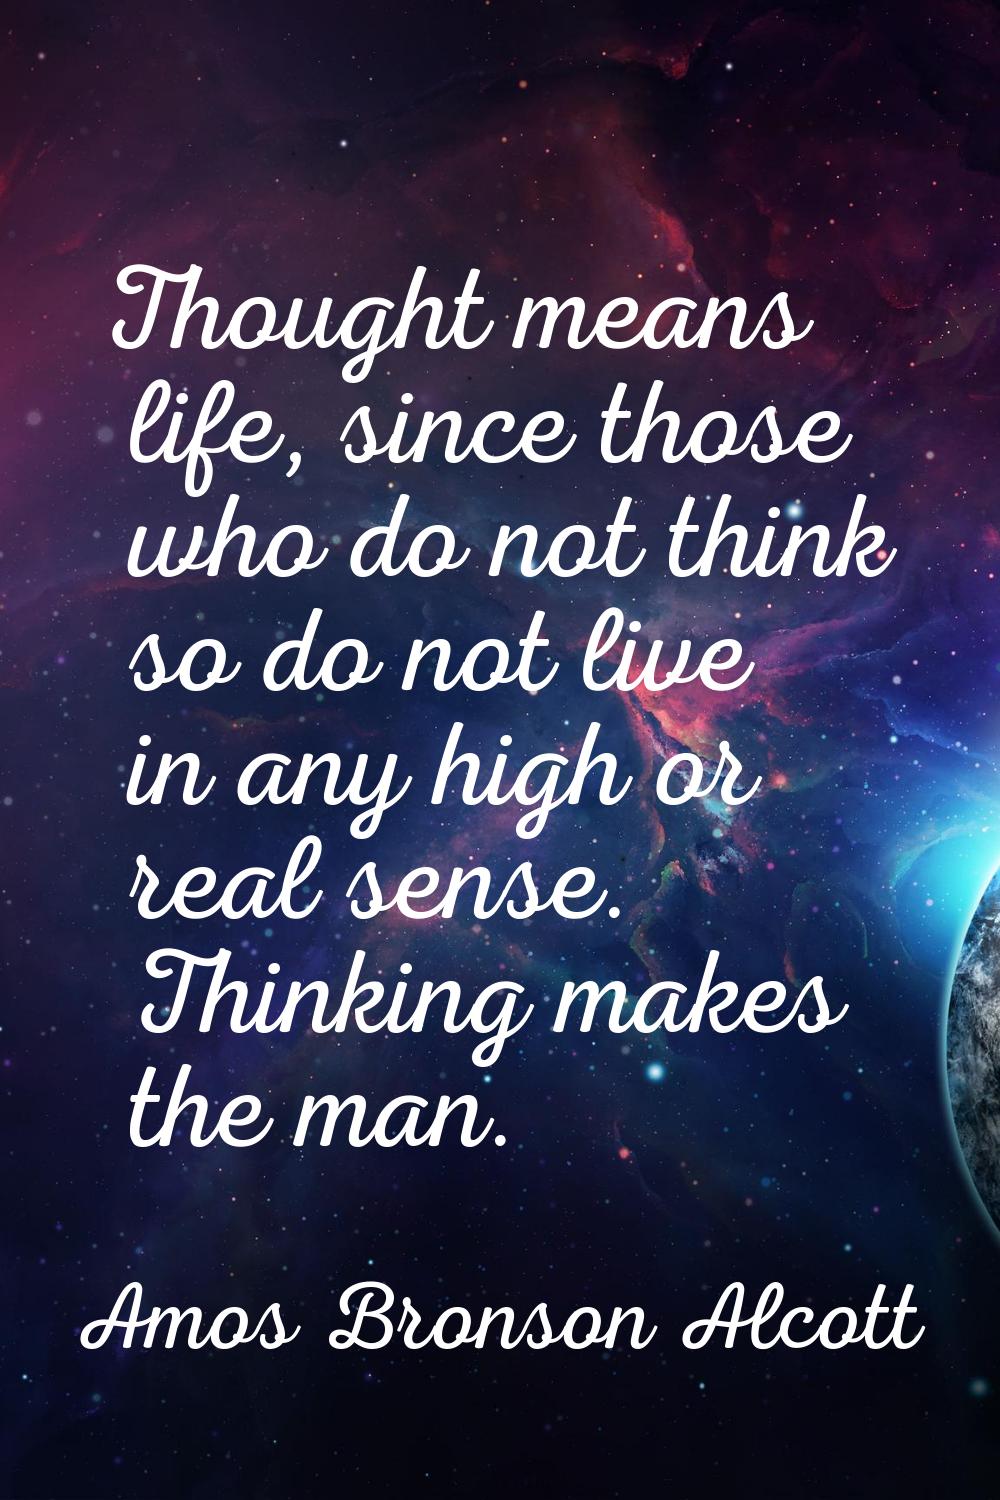 Thought means life, since those who do not think so do not live in any high or real sense. Thinking